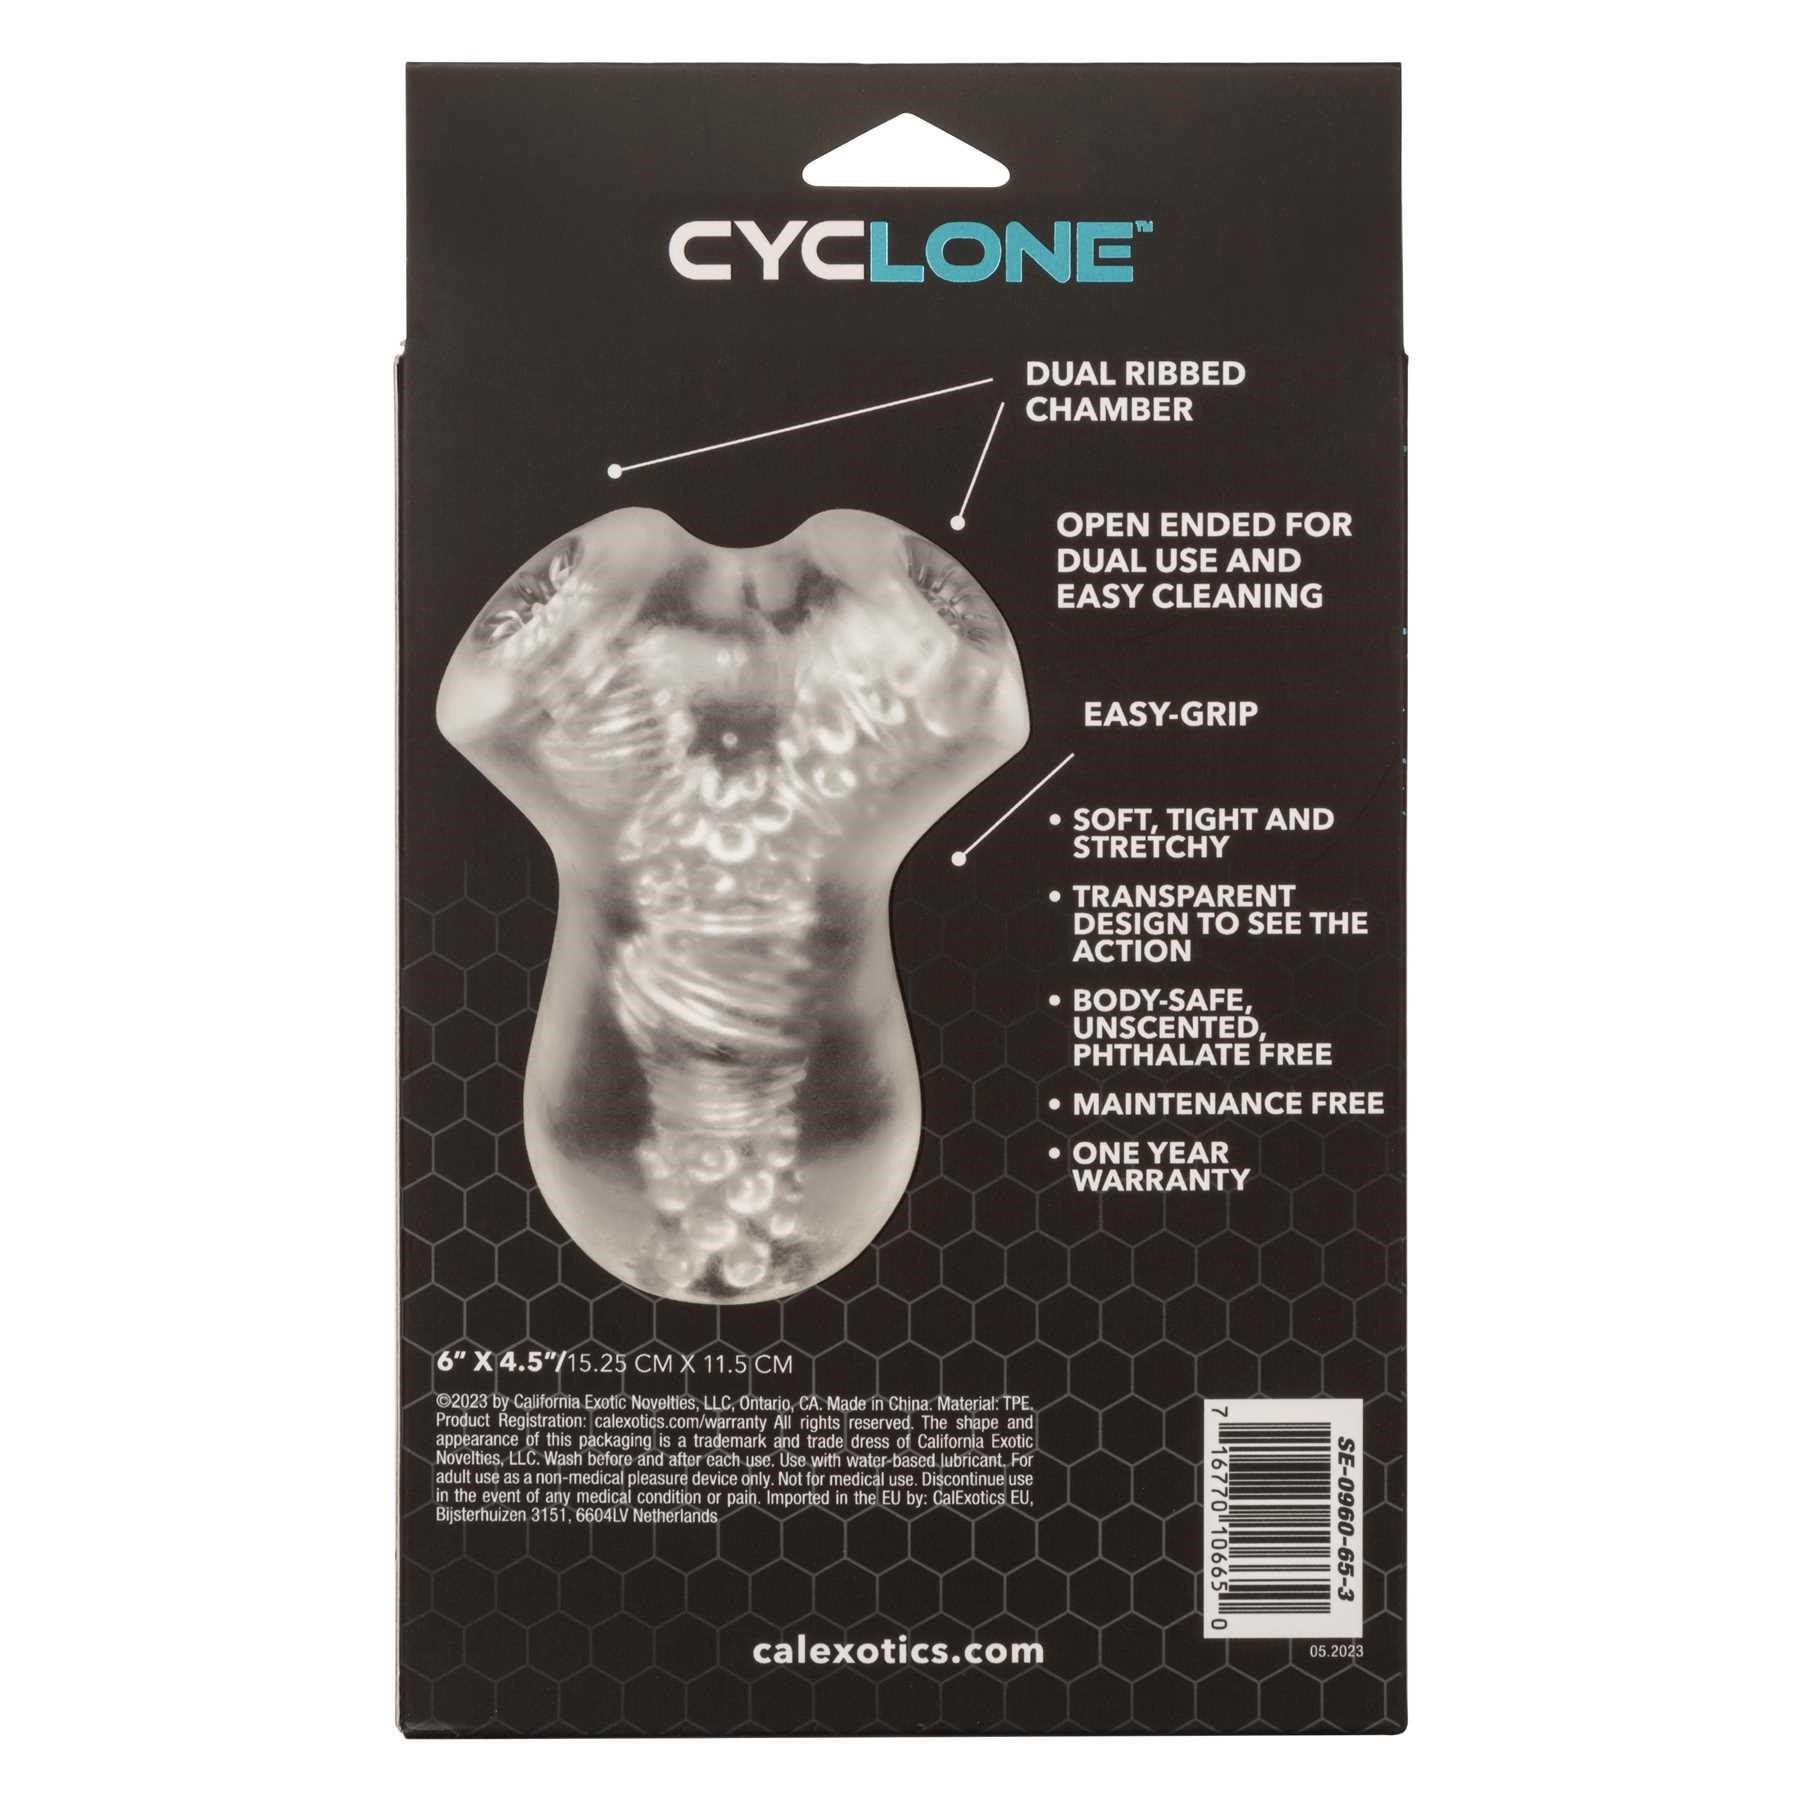 Cyclone Dual Chamber Stroker back of box